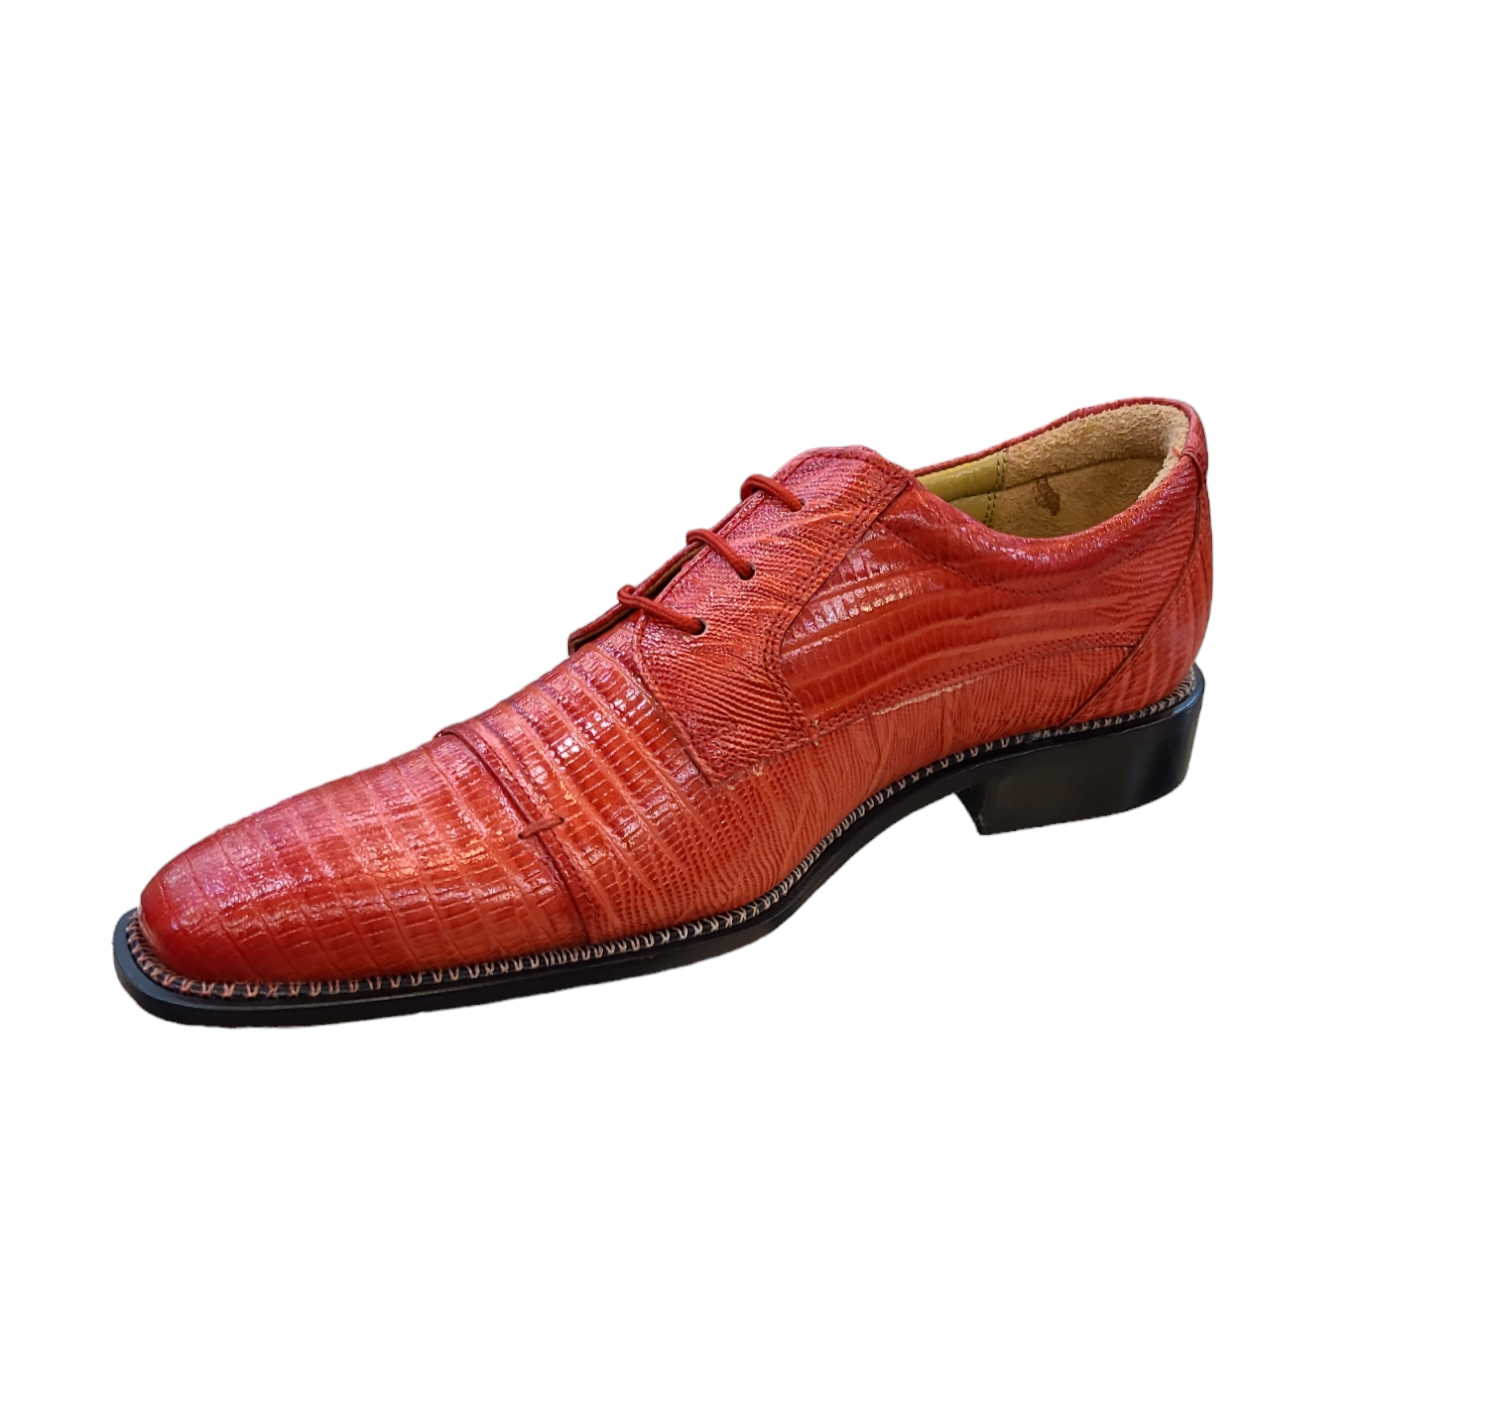 Liberty Lace up Genuine leather Shoes